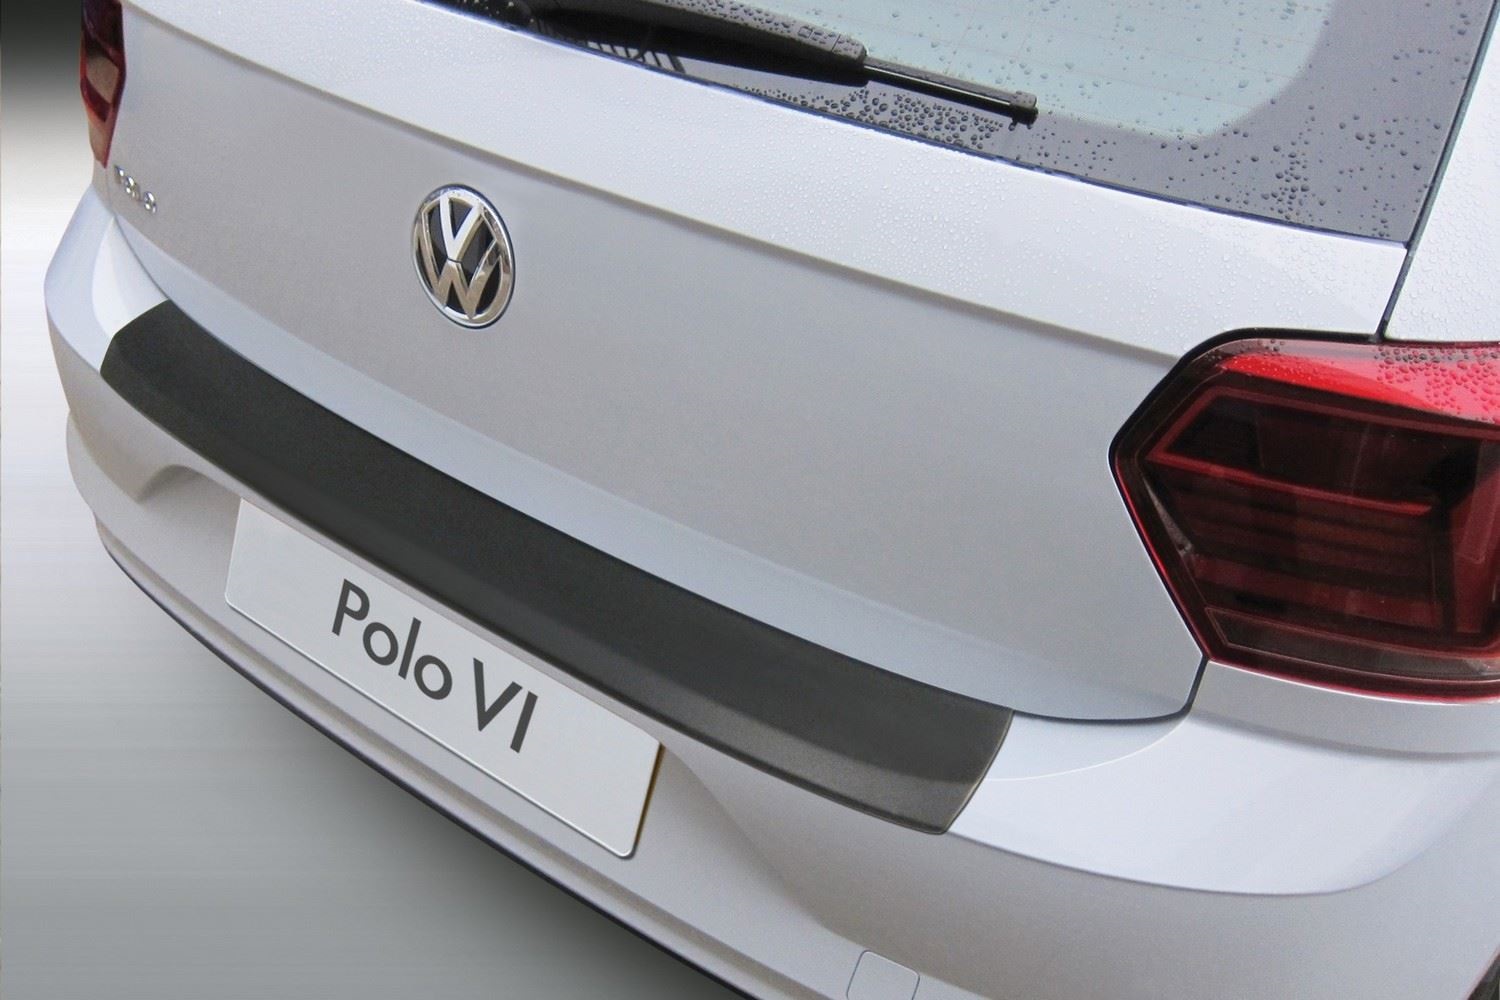 https://www.carparts-expert.com/images/stories/virtuemart/product/vw9pobp-volkswagen-polo-vi-aw-2017-present-rear-bumper-protector-abs-1.jpg